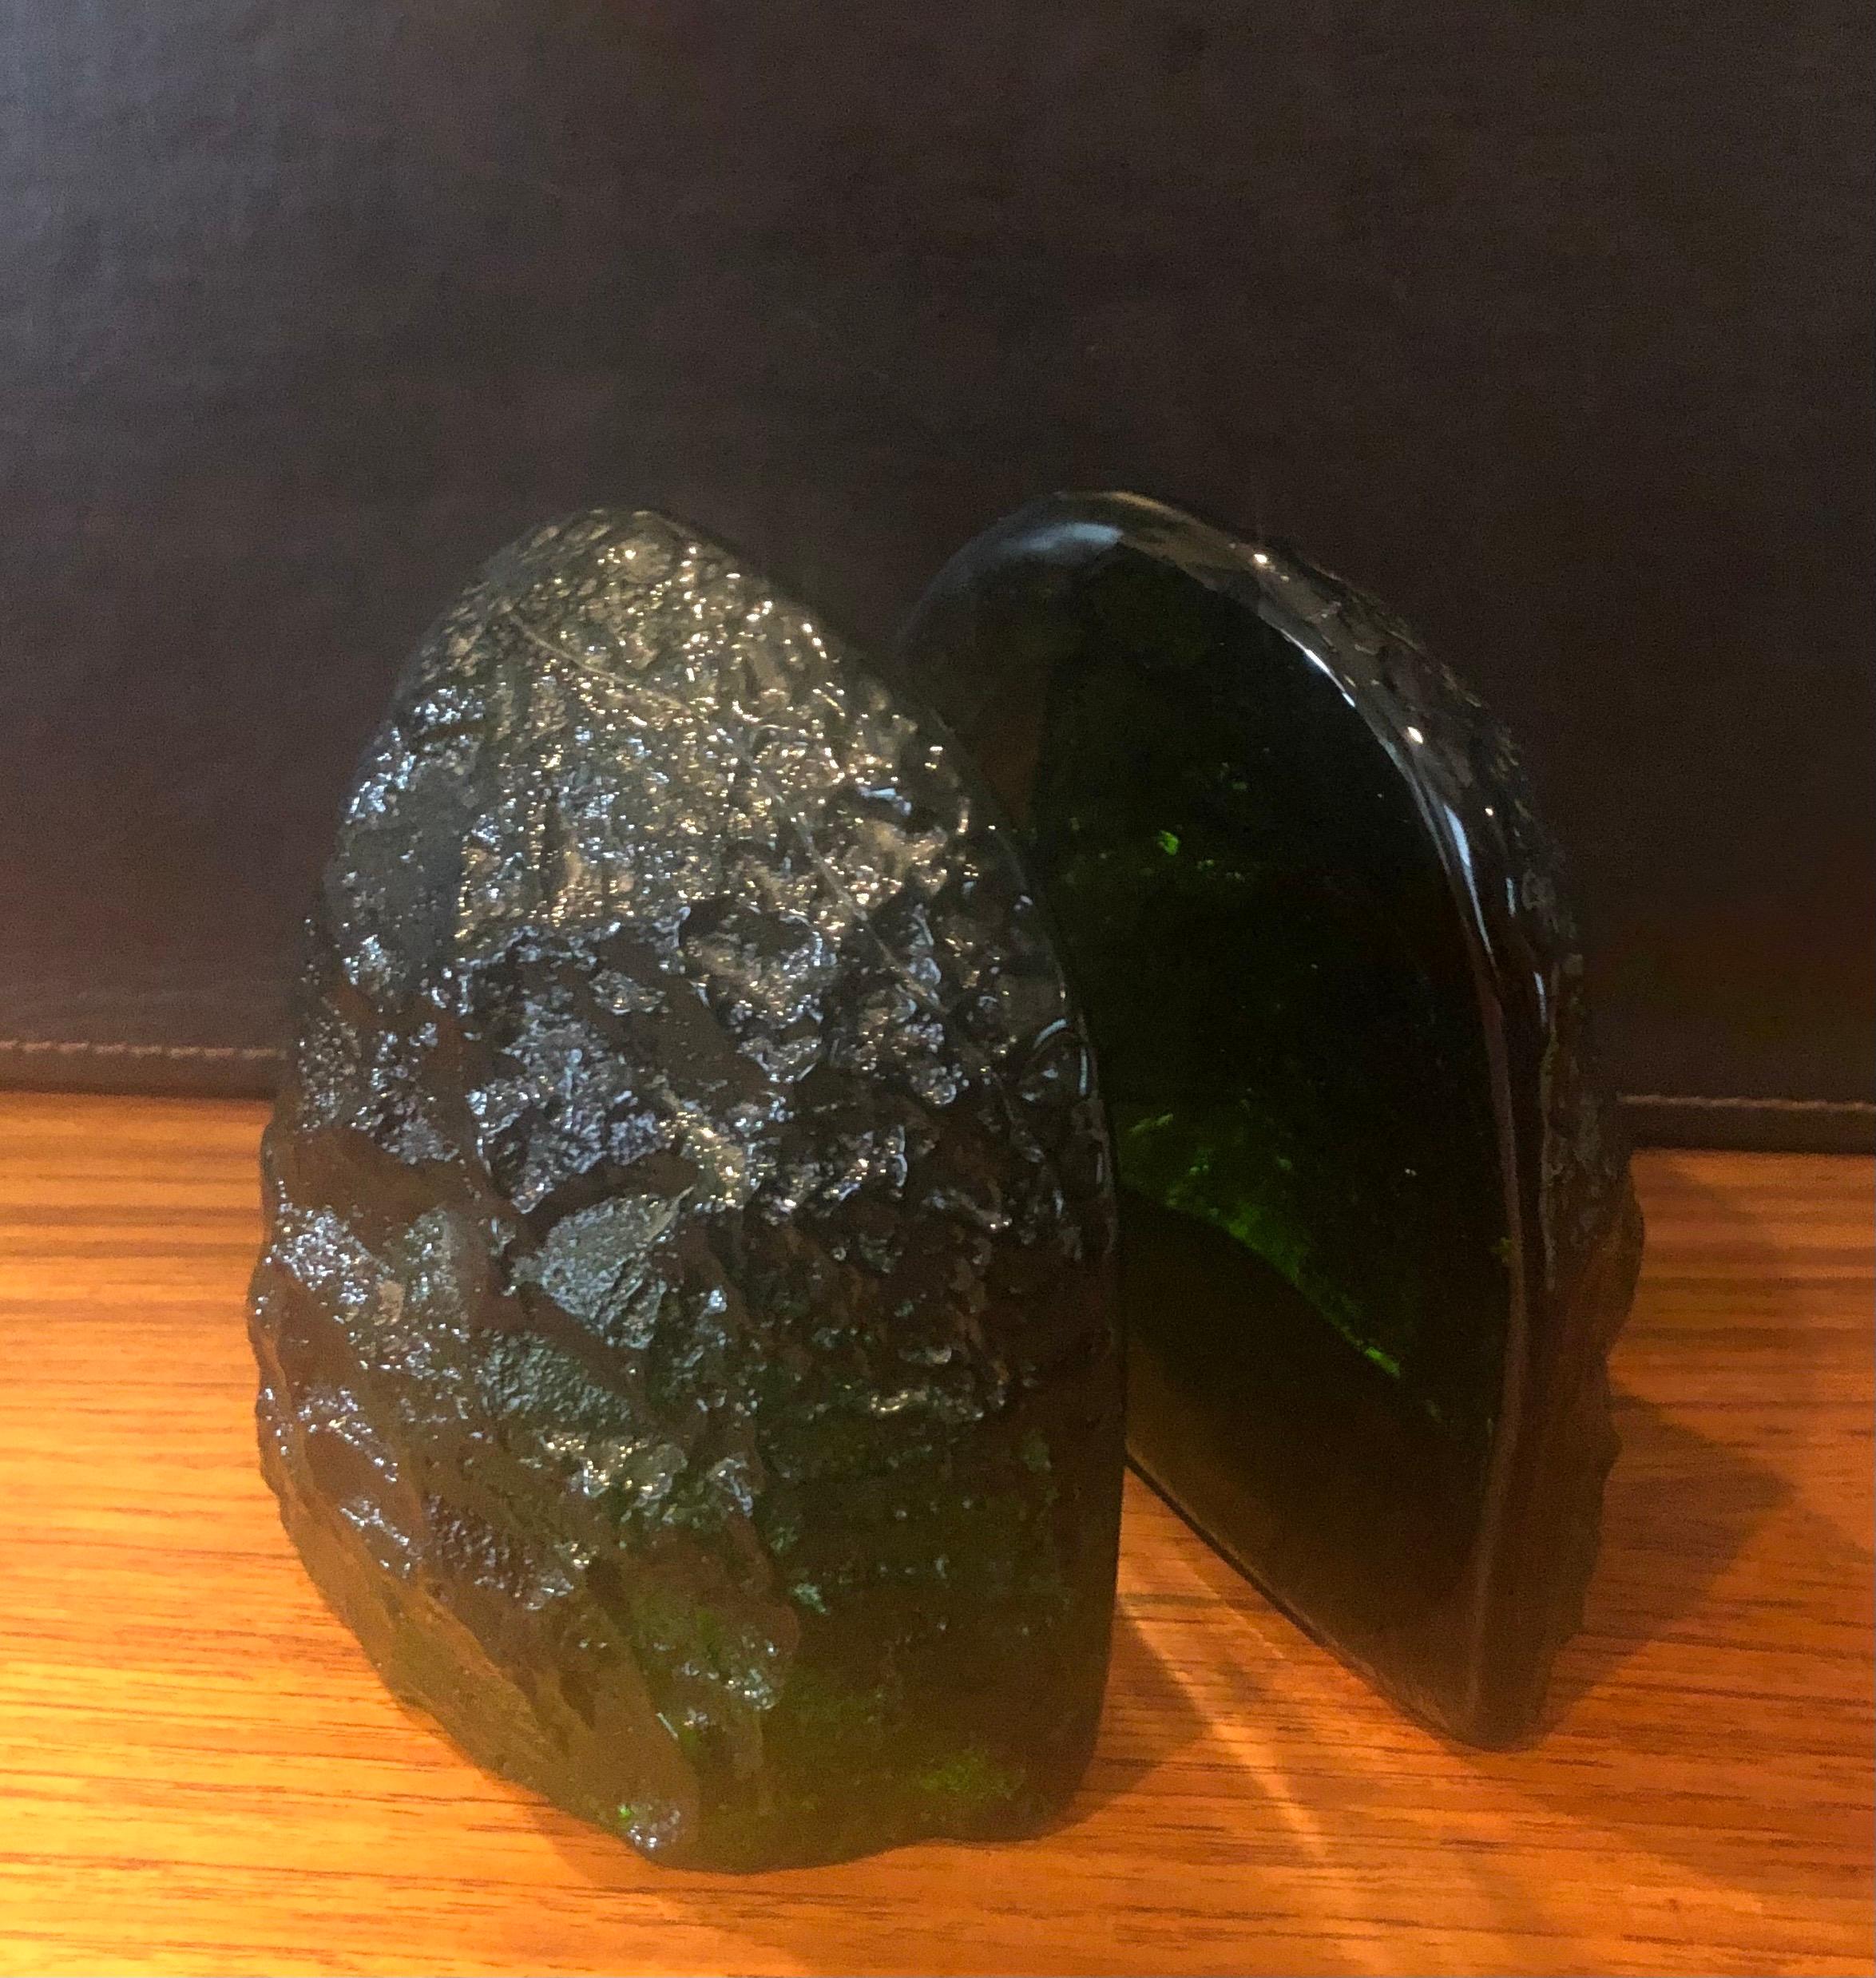 Nice pair of of free flow ice block emerald glass bookends by Blenko Glass, circa 1970s. The bookends look like a large chunk of ice with a very cool three dimensional effect and measure 5